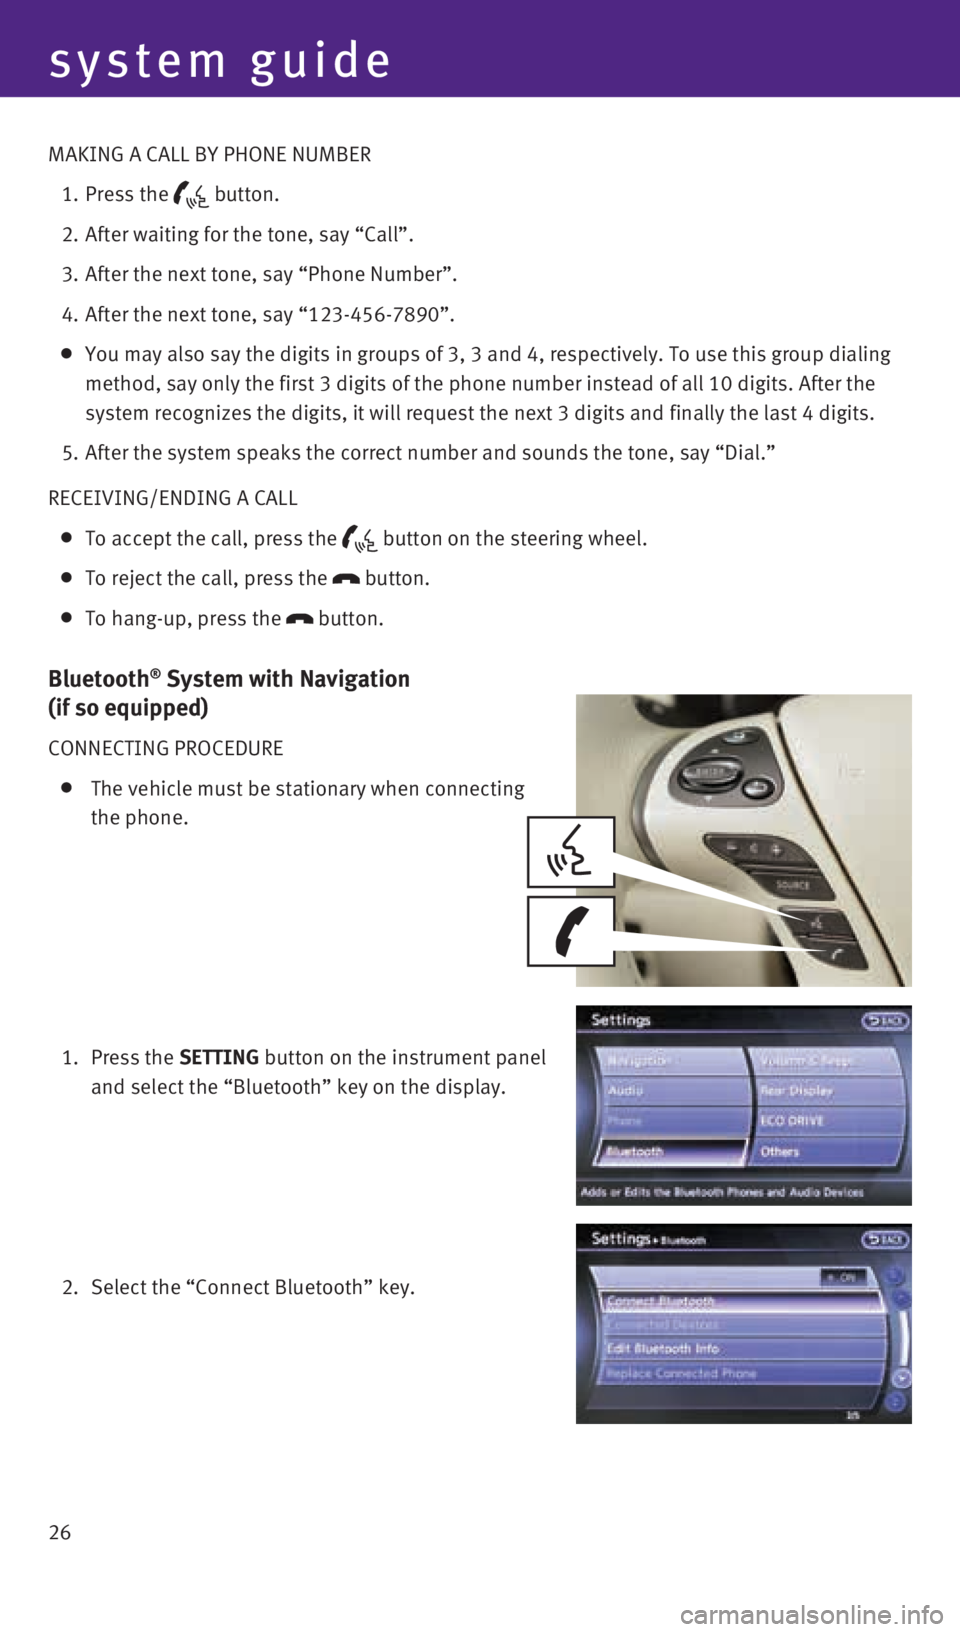 INFINITI QX60 HYBRID 2014  Quick Reference Guide system guide
26 MAKING A CALL By PHONE NUMBER
 1.   Press the 
 button.
  2.   After waiting for the tone, say “Call”.
  3.   After the next tone, say “Phone Number”.
  4.   After the next ton